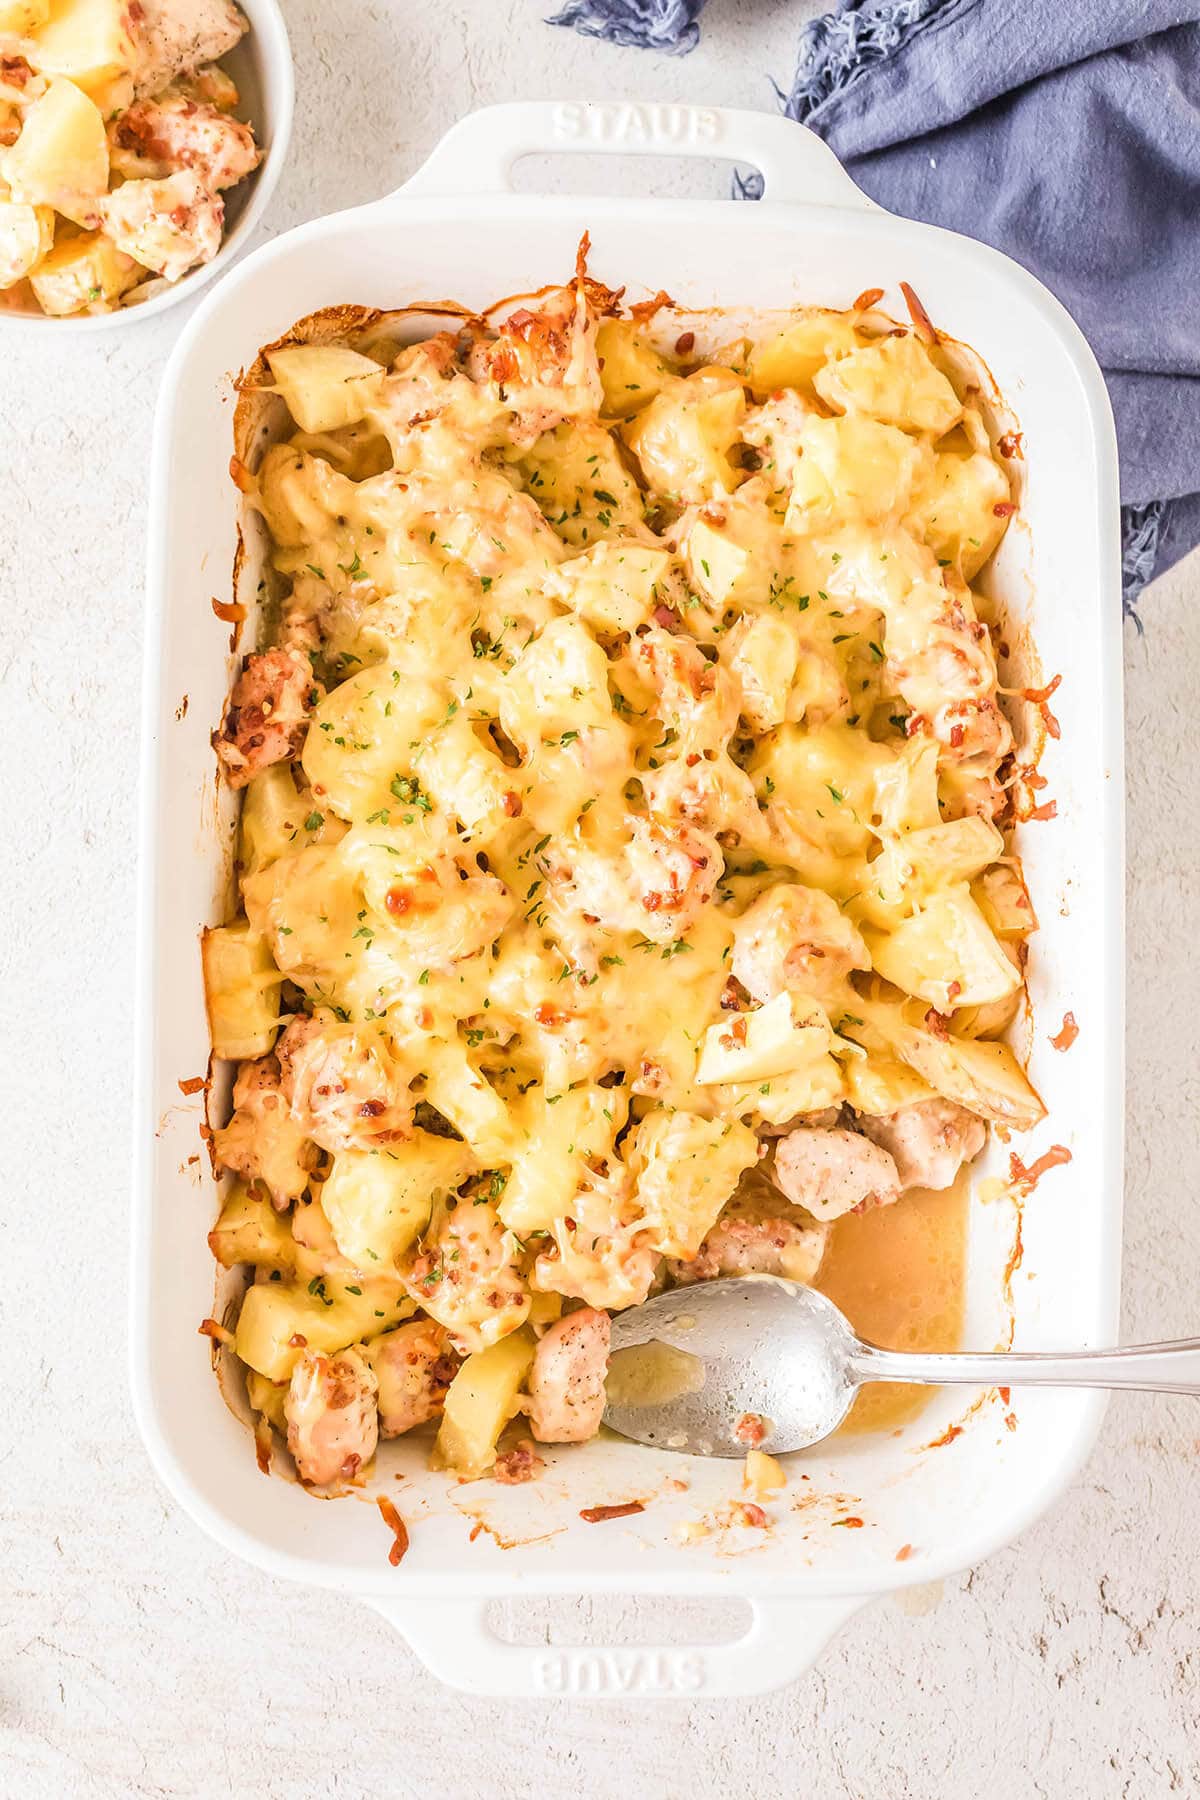 Chicken bacon ranch potato bake in casserole dish with serving spoon.